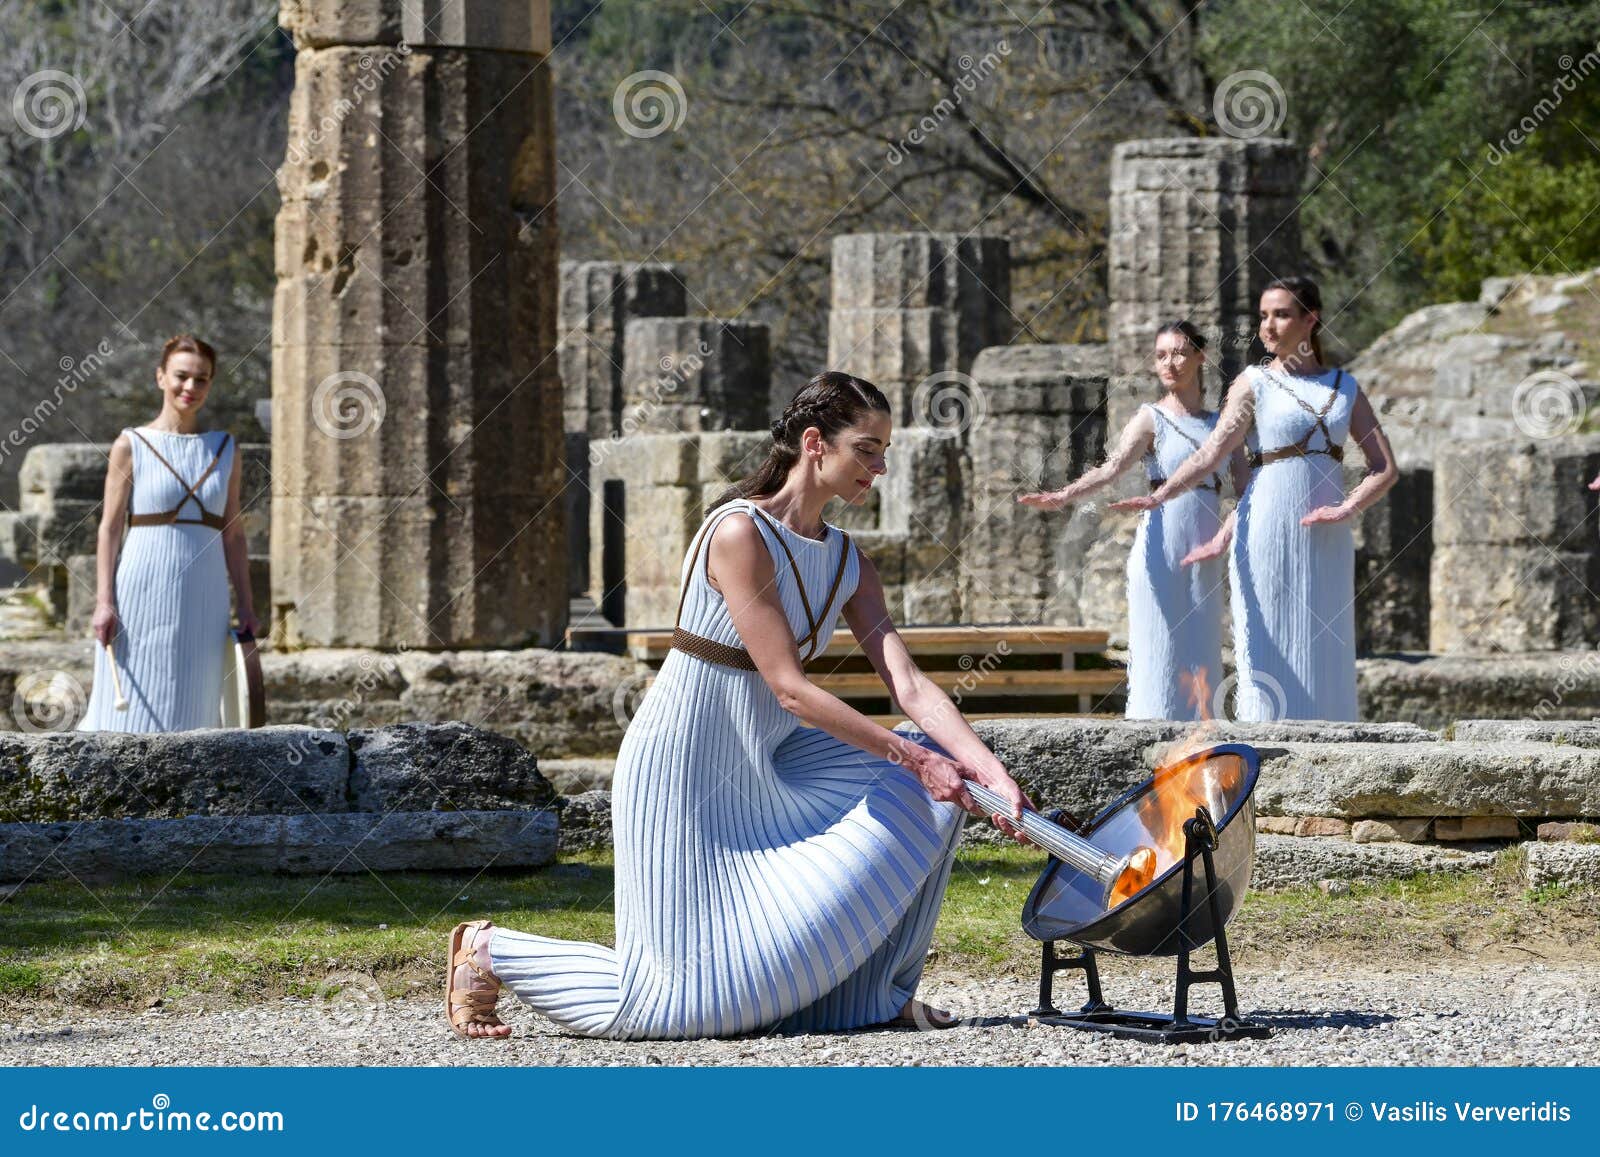 Olympic Flame Handover Ceremony for the Tokyo 2020 Summer Olympic Games ...